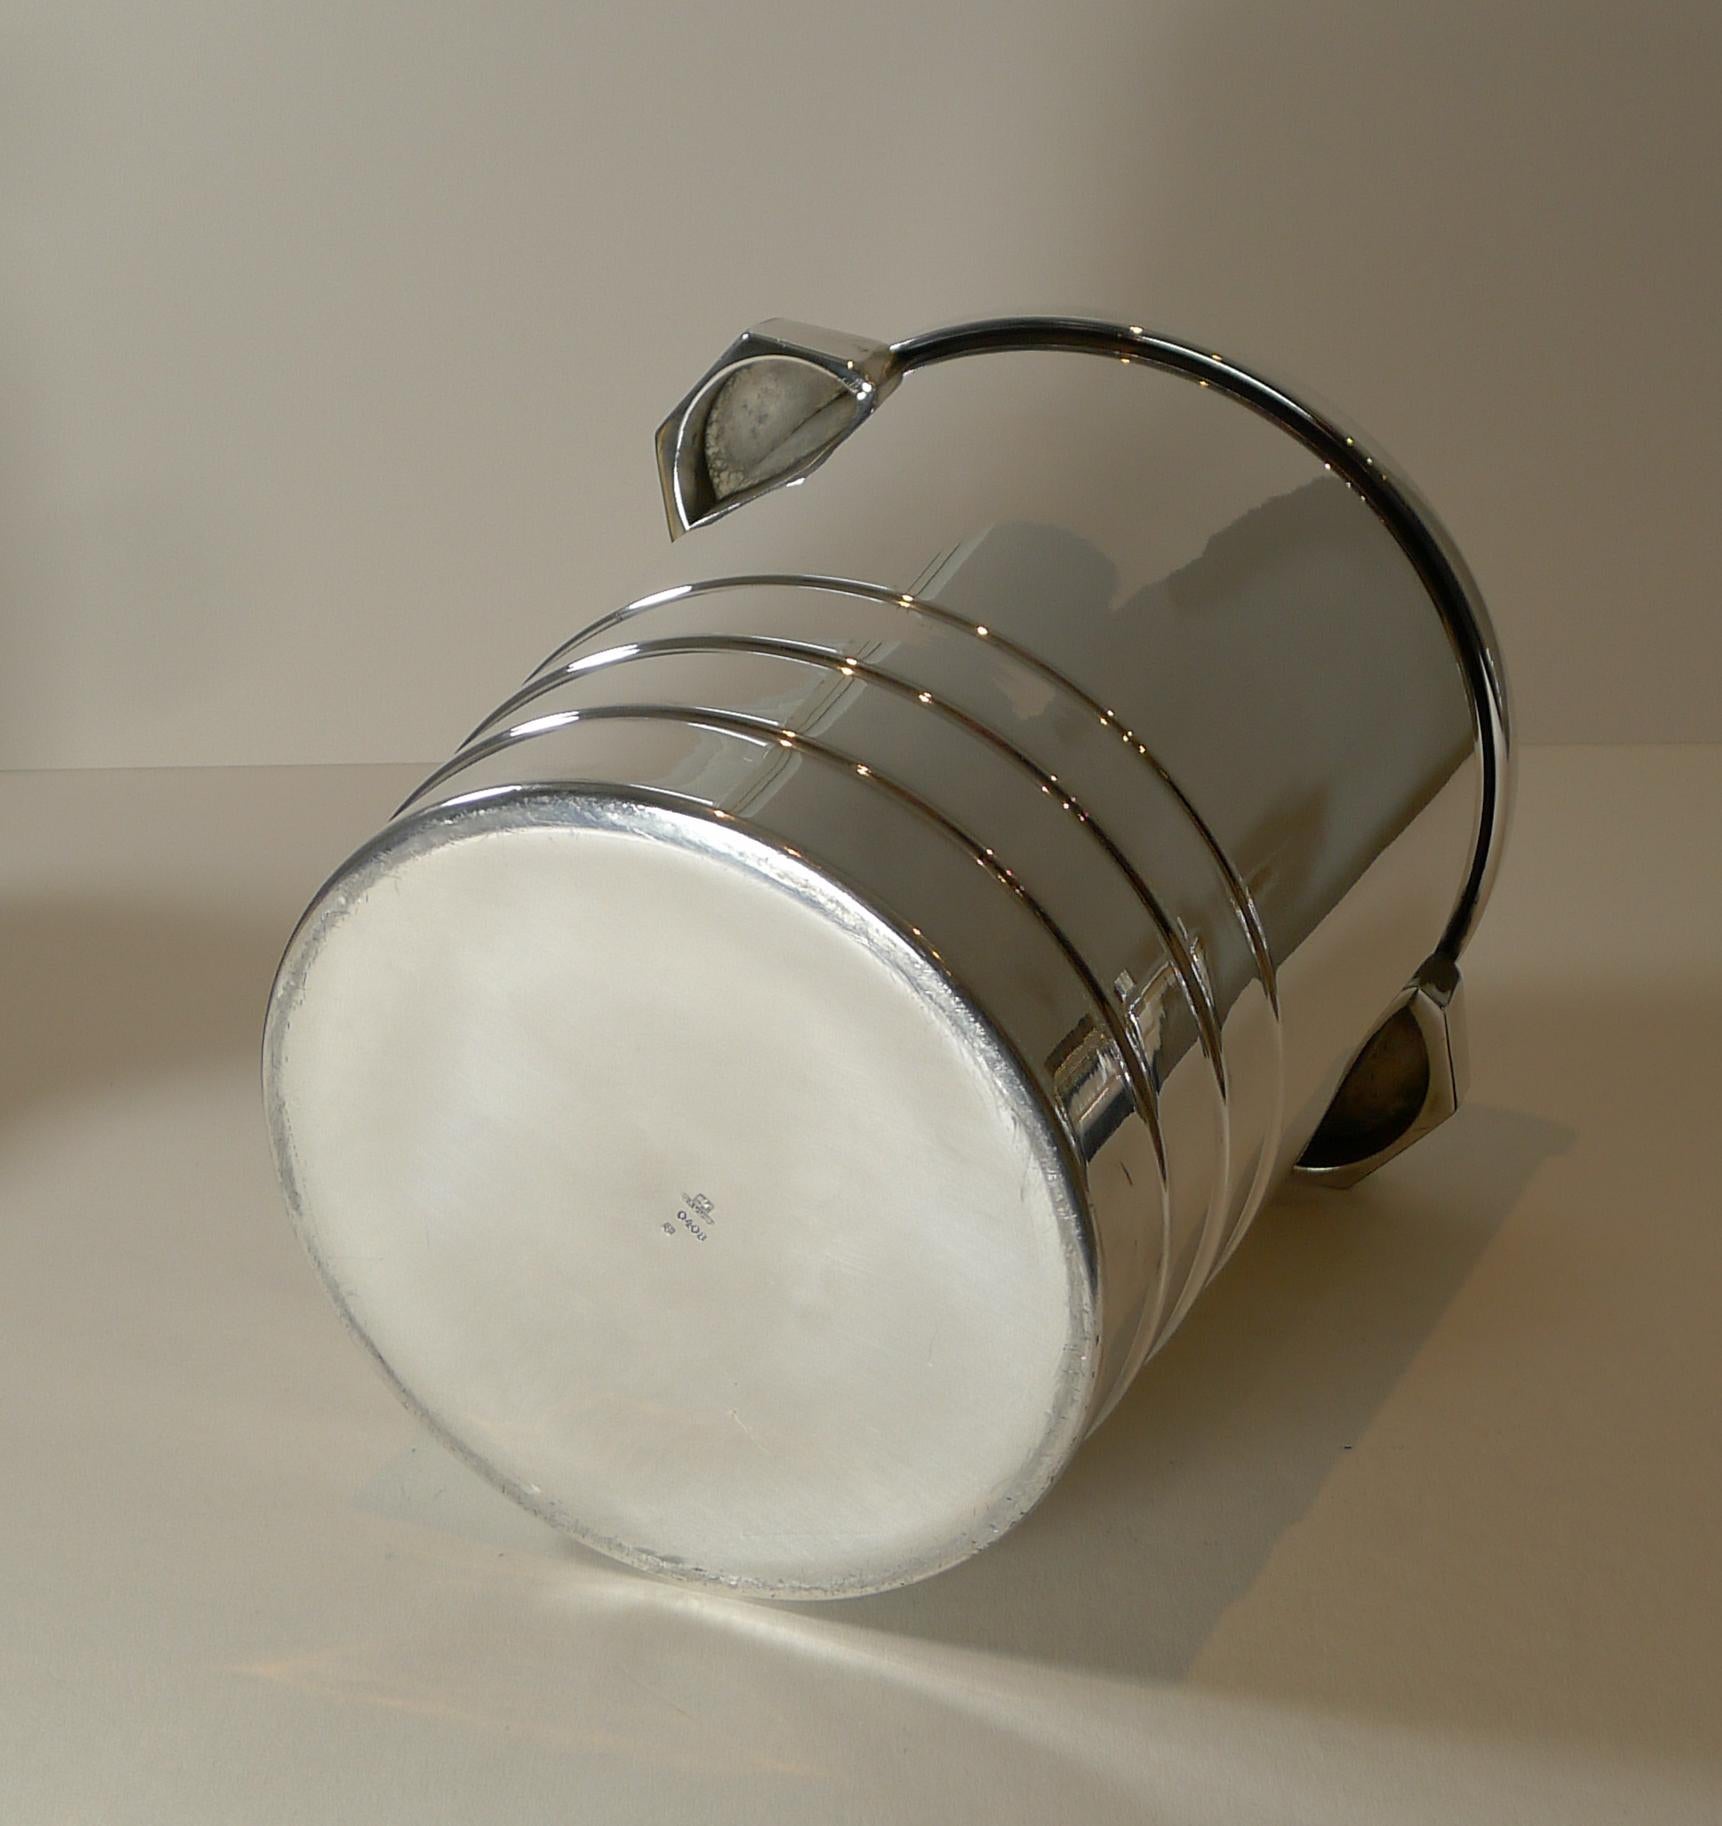 A magnificent example of an Art Deco wine cooler / Champagne bucket by the famous French silversmith's Maison Christofle, this example being part of their Gallia range.

A striking, almost modernist design with lug handles and tapered shape, the